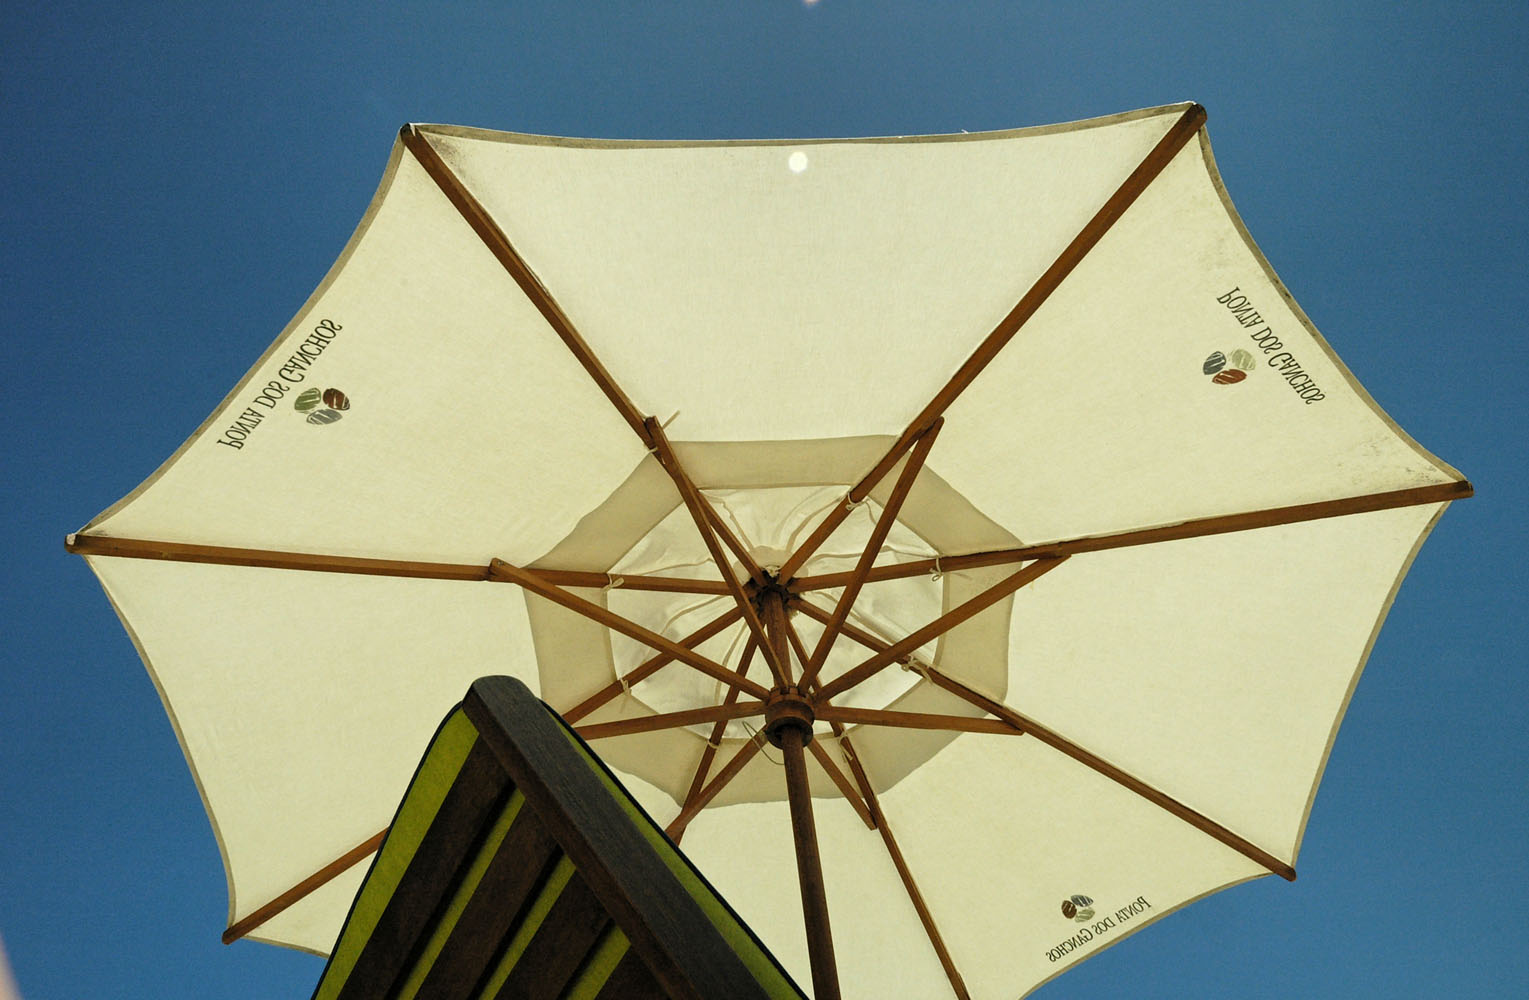 the top of an umbrella opened in the sun